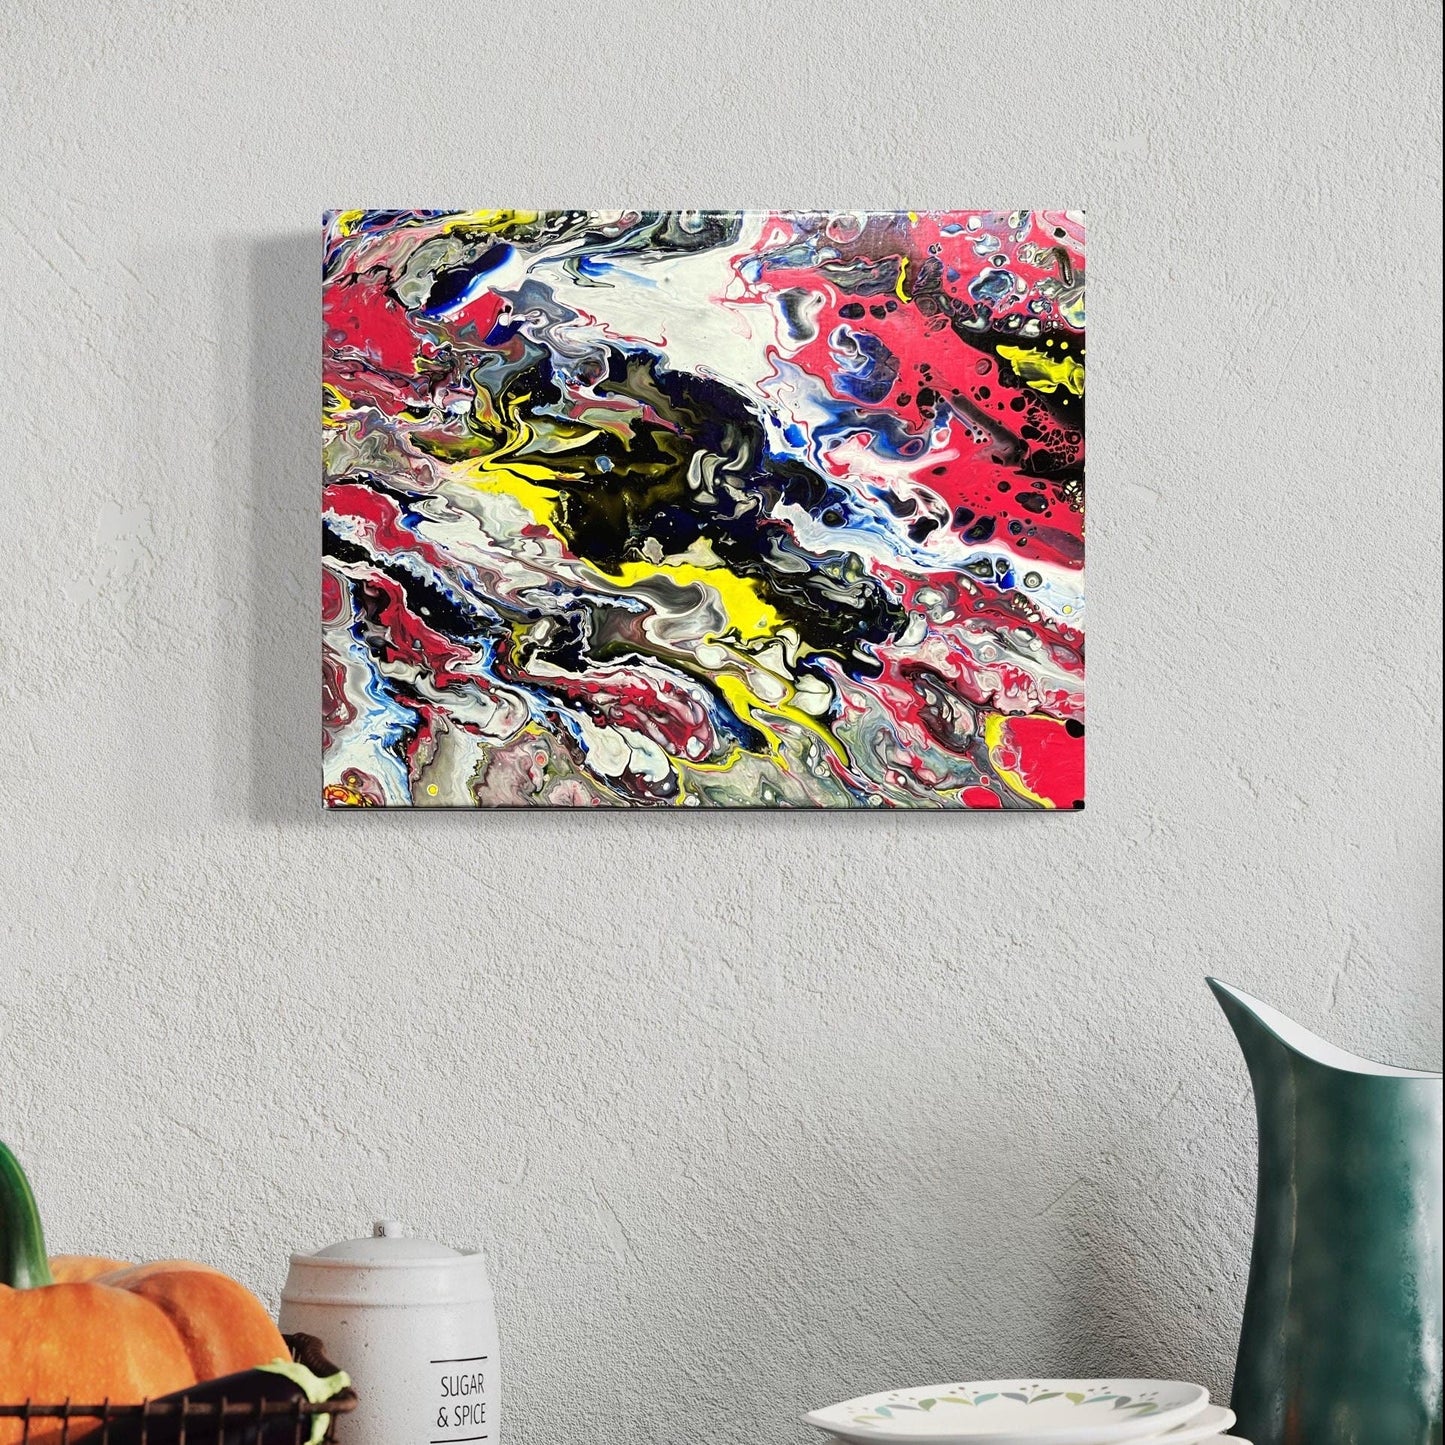 black, white, yellow, and red fluid art creating an abstract image 